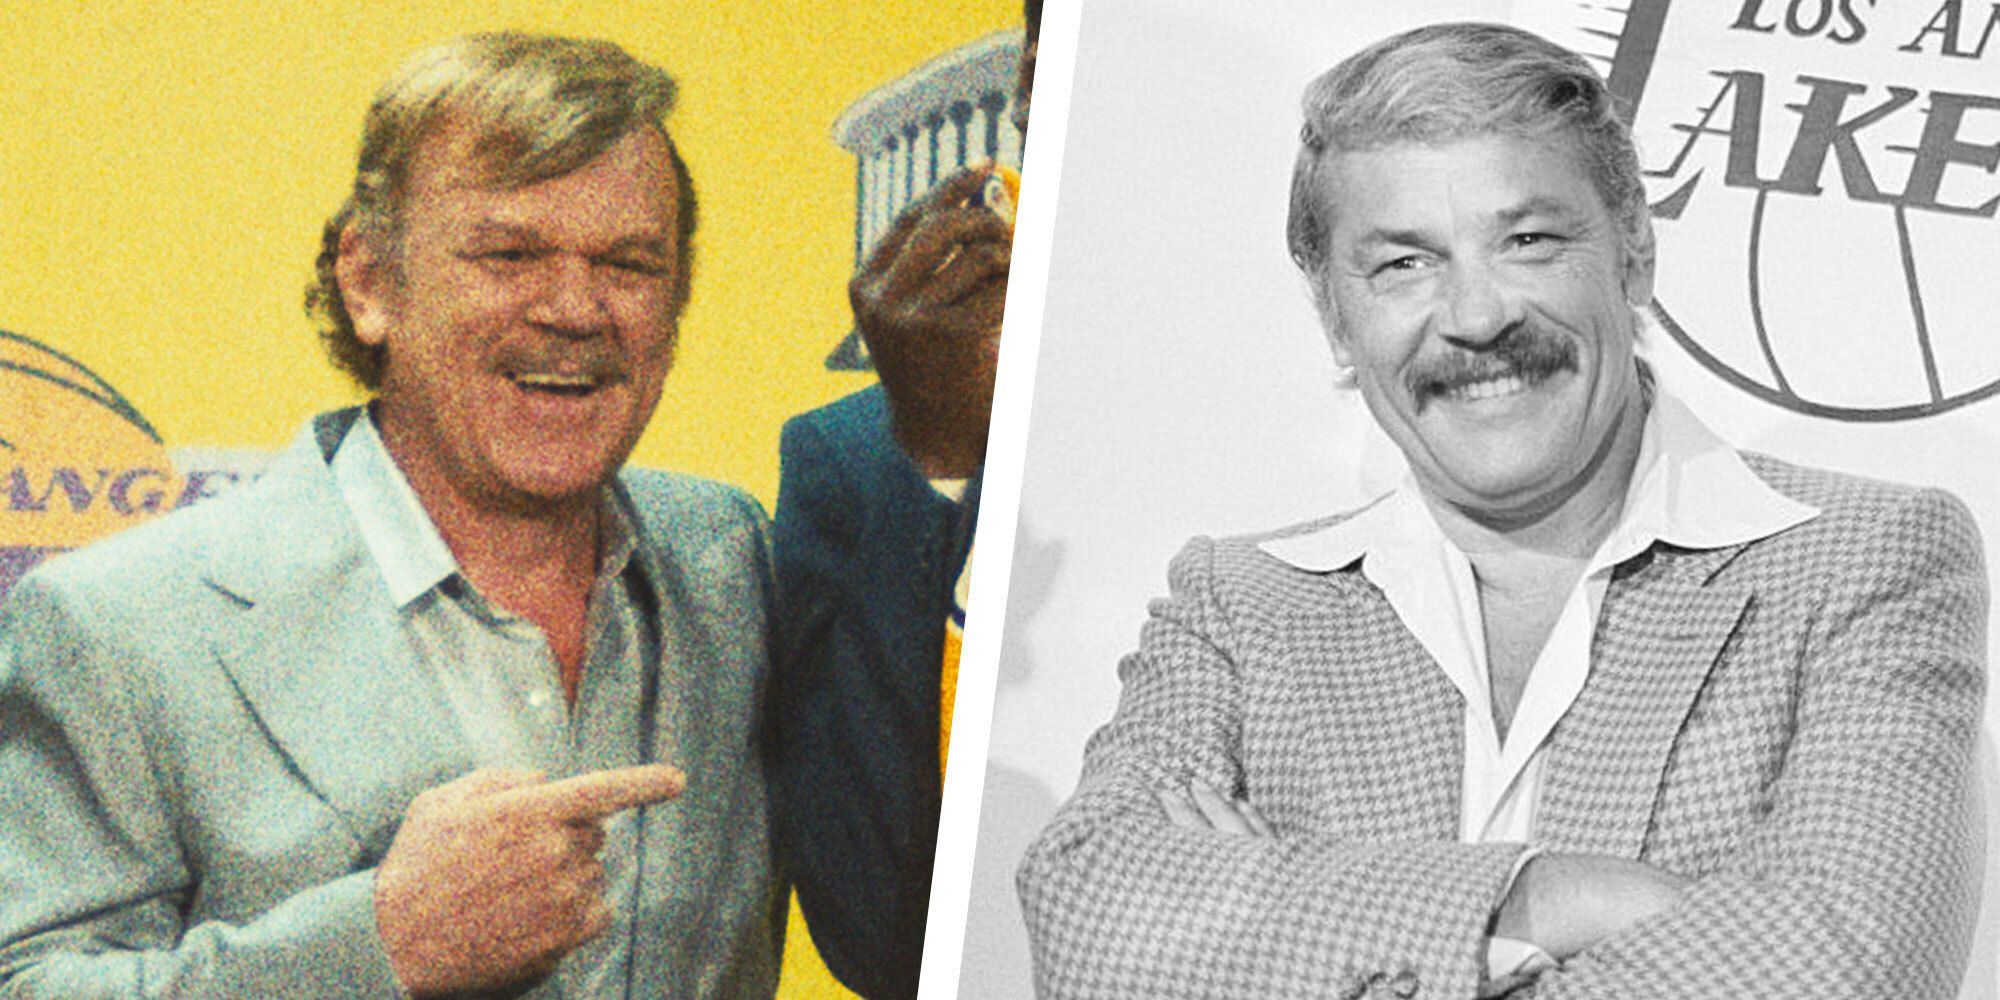 Lakers innovative owner Jerry Buss, 80, dies